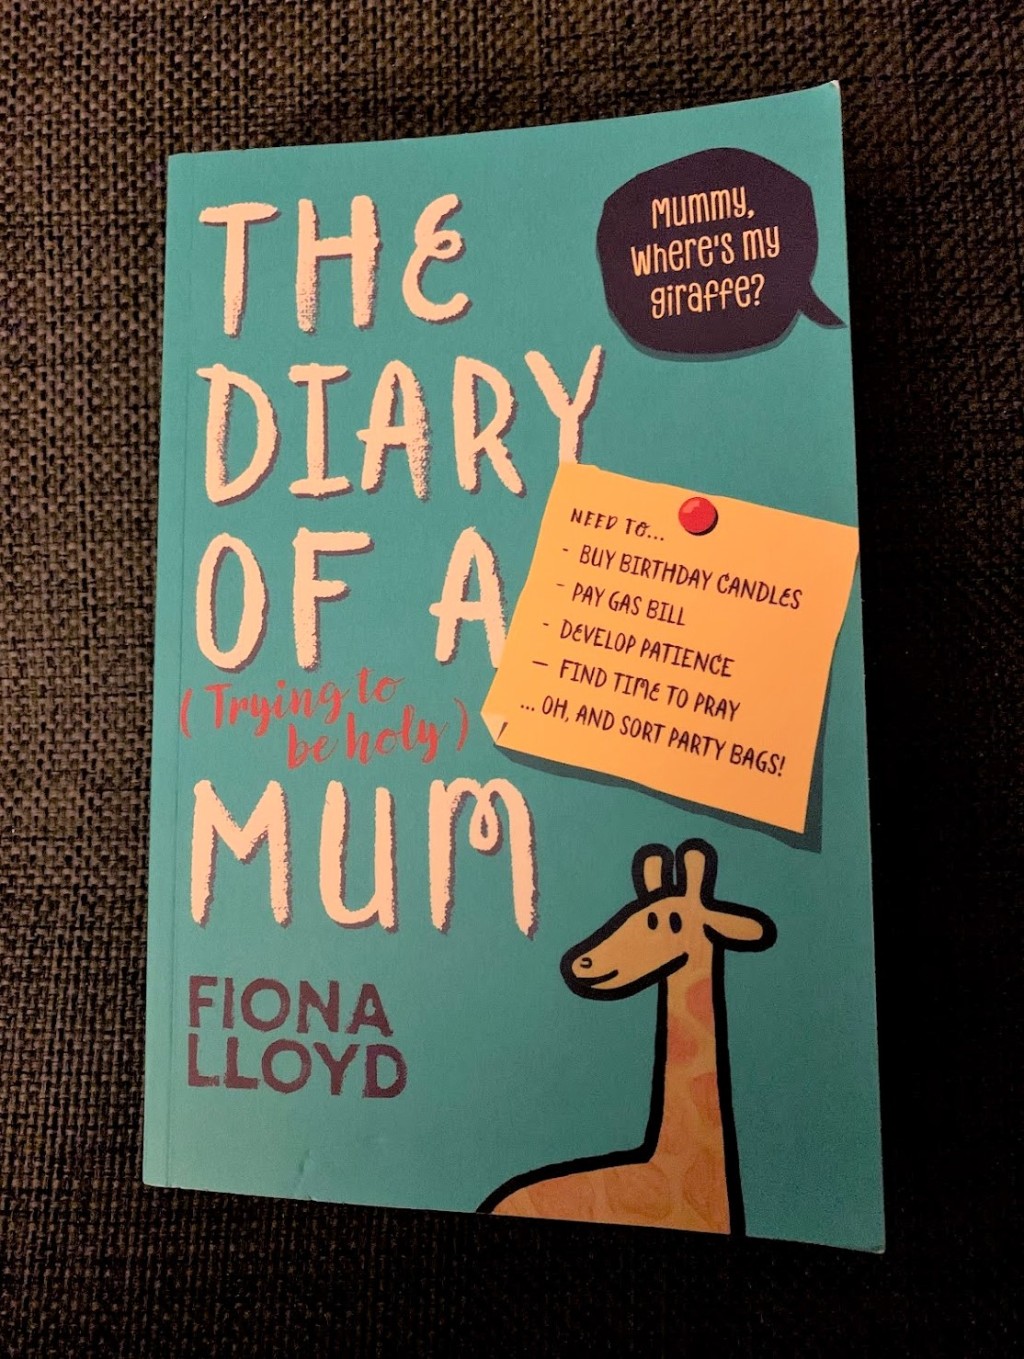 Fiona Lloyd – The Diary of a (Trying to be Holy) Mum